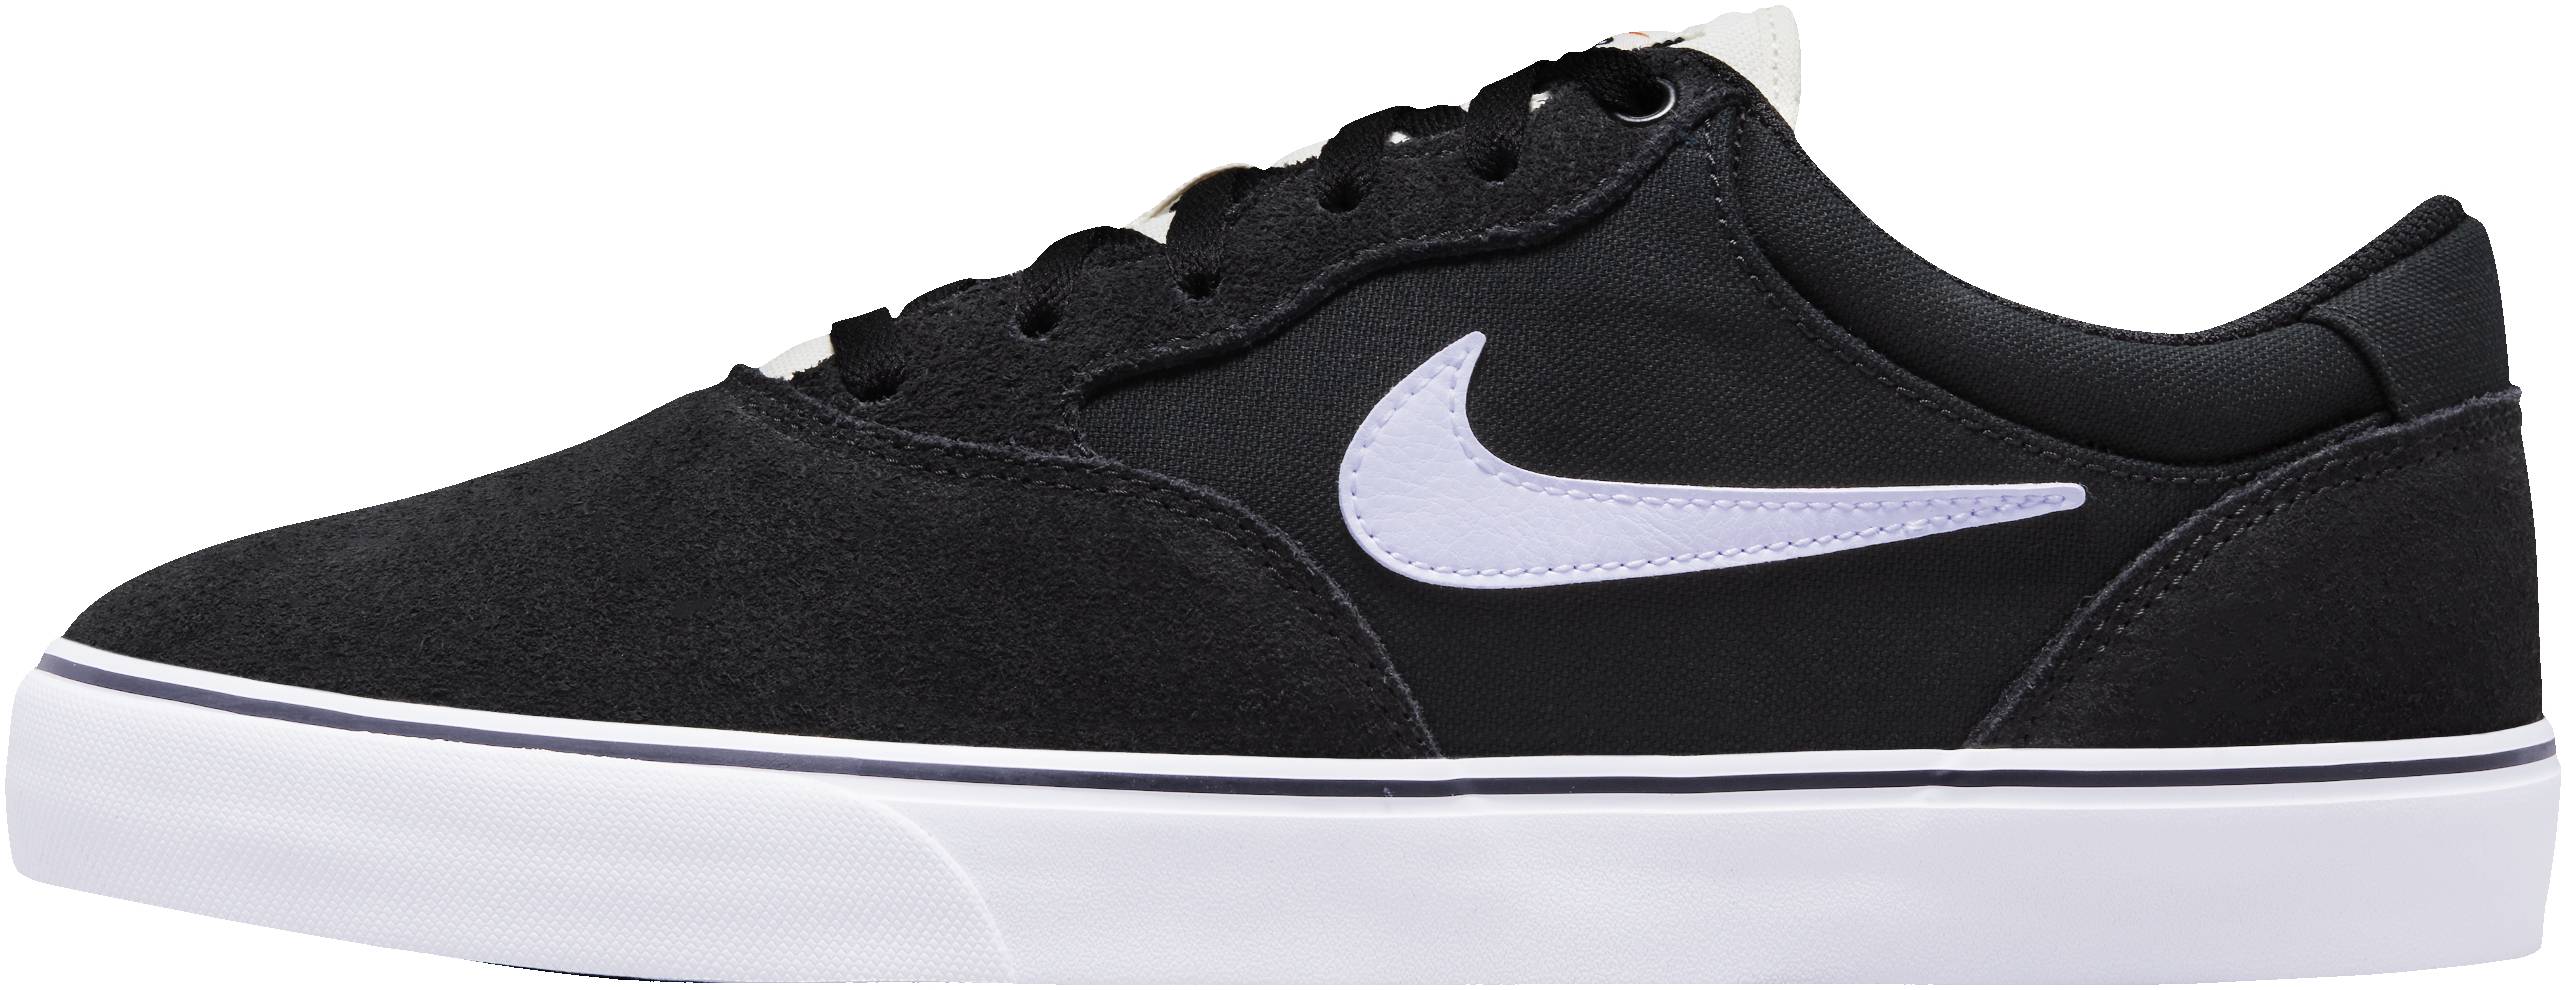 Nike gray nike sb shoes SB Chron 2 sneakers in 8 colors (only $55) | RunRepeat